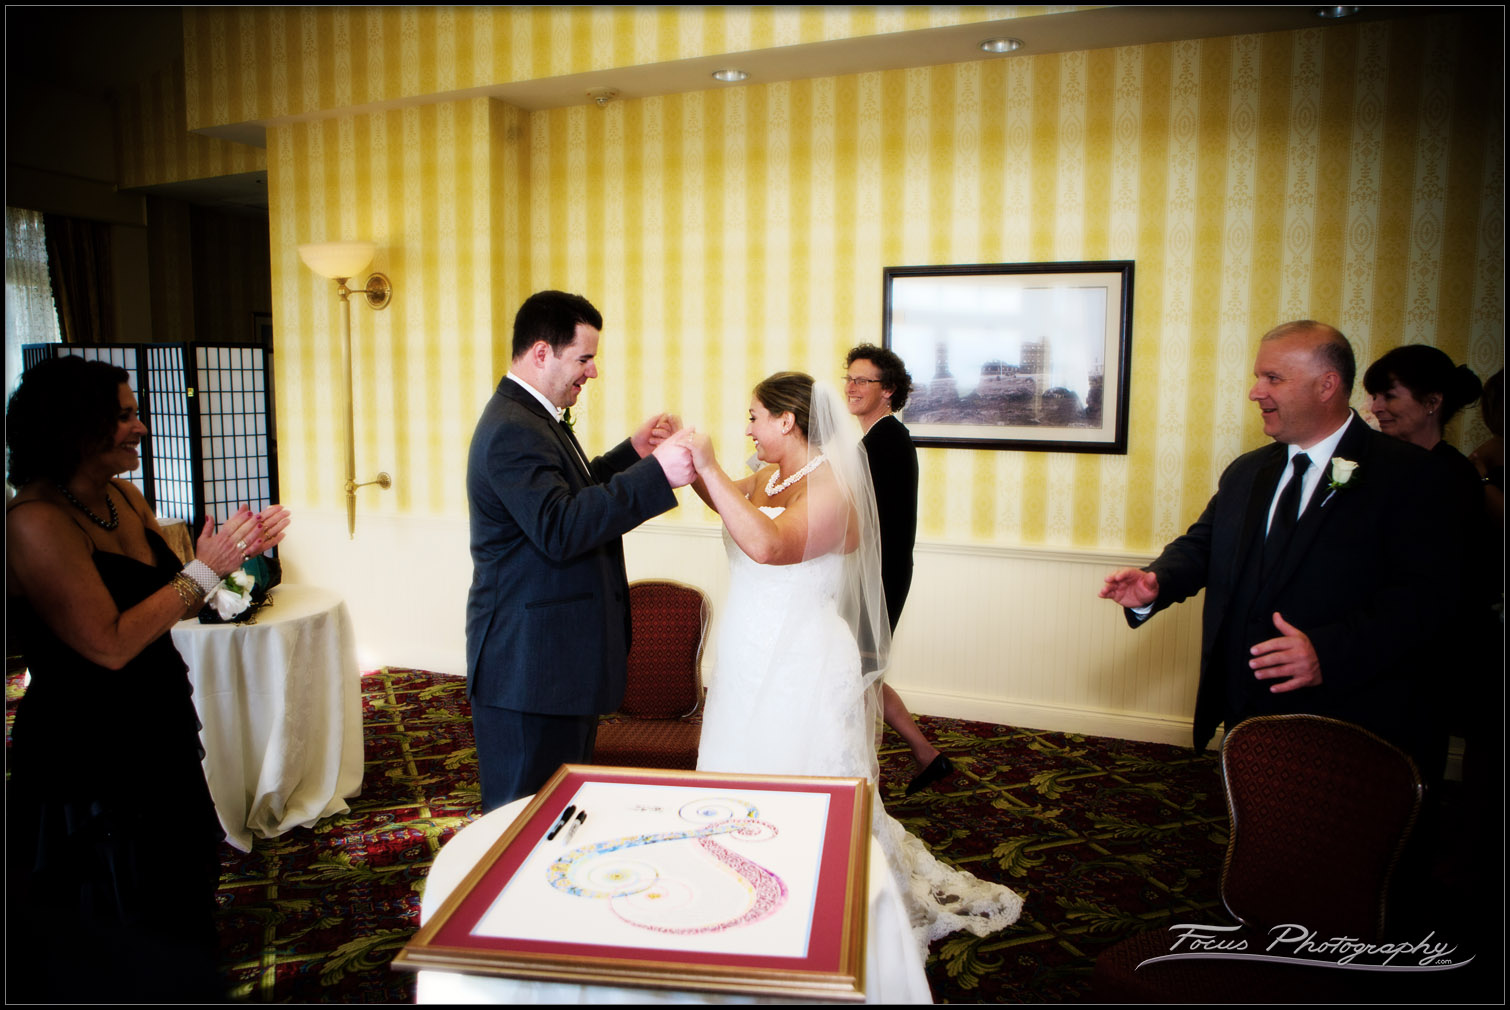 Ketubah signing at Wentworth by the sea